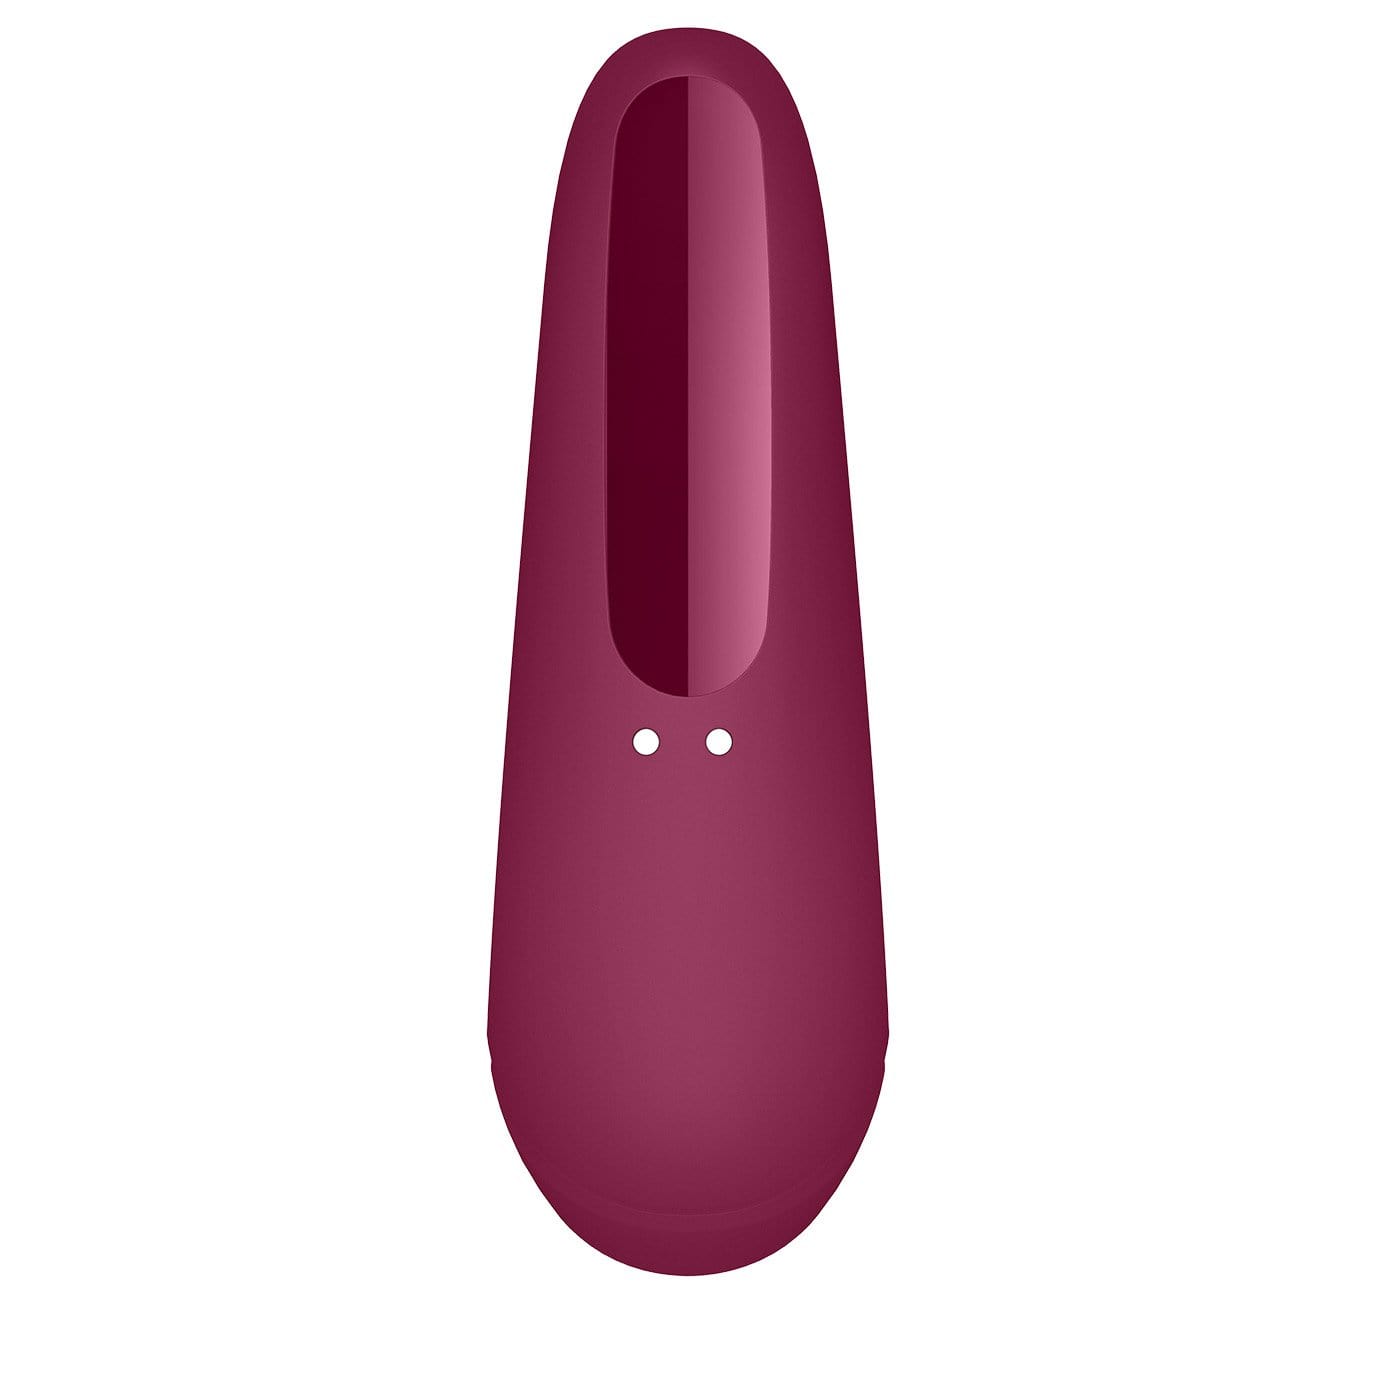 Satisfyer - Curvy 1+ App-Controlled Air Pulse Stimulator Vibrator (Rose Red) Clit Massager (Vibration) Rechargeable 289885089 CherryAffairs